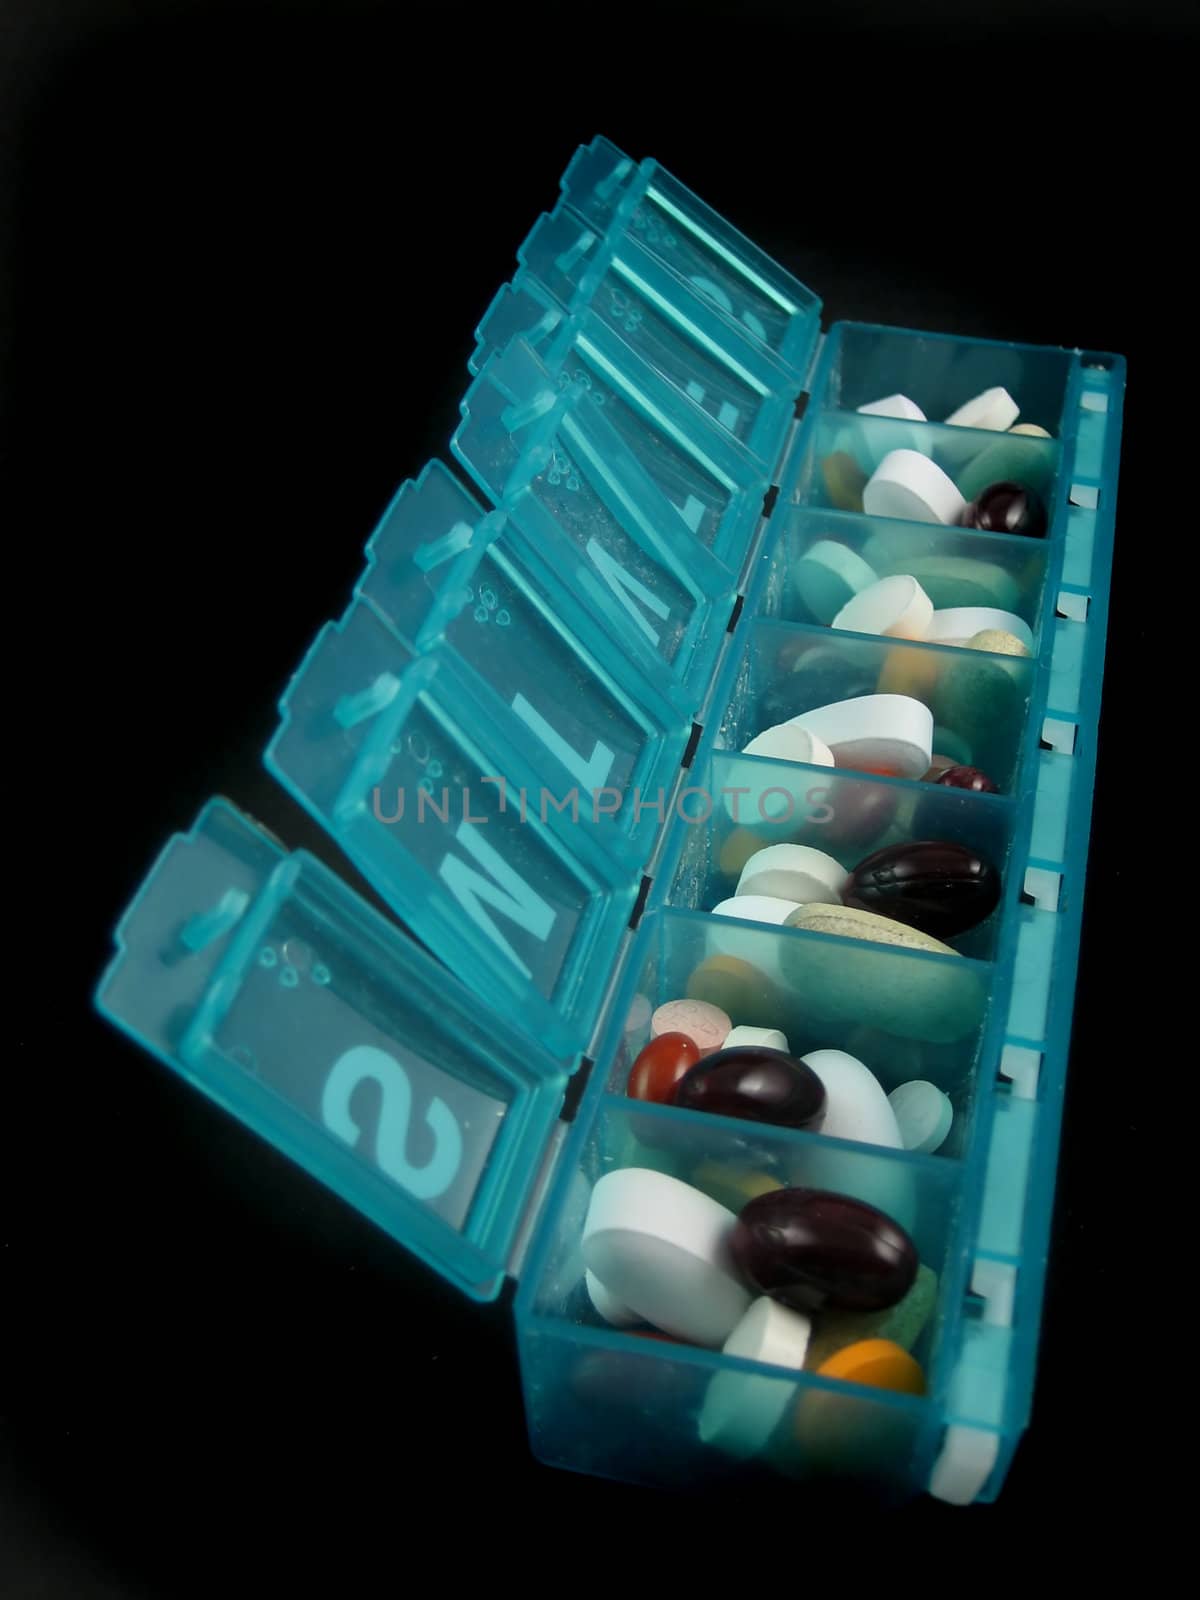 Pictures of medicine, pills and pharmaceuticals